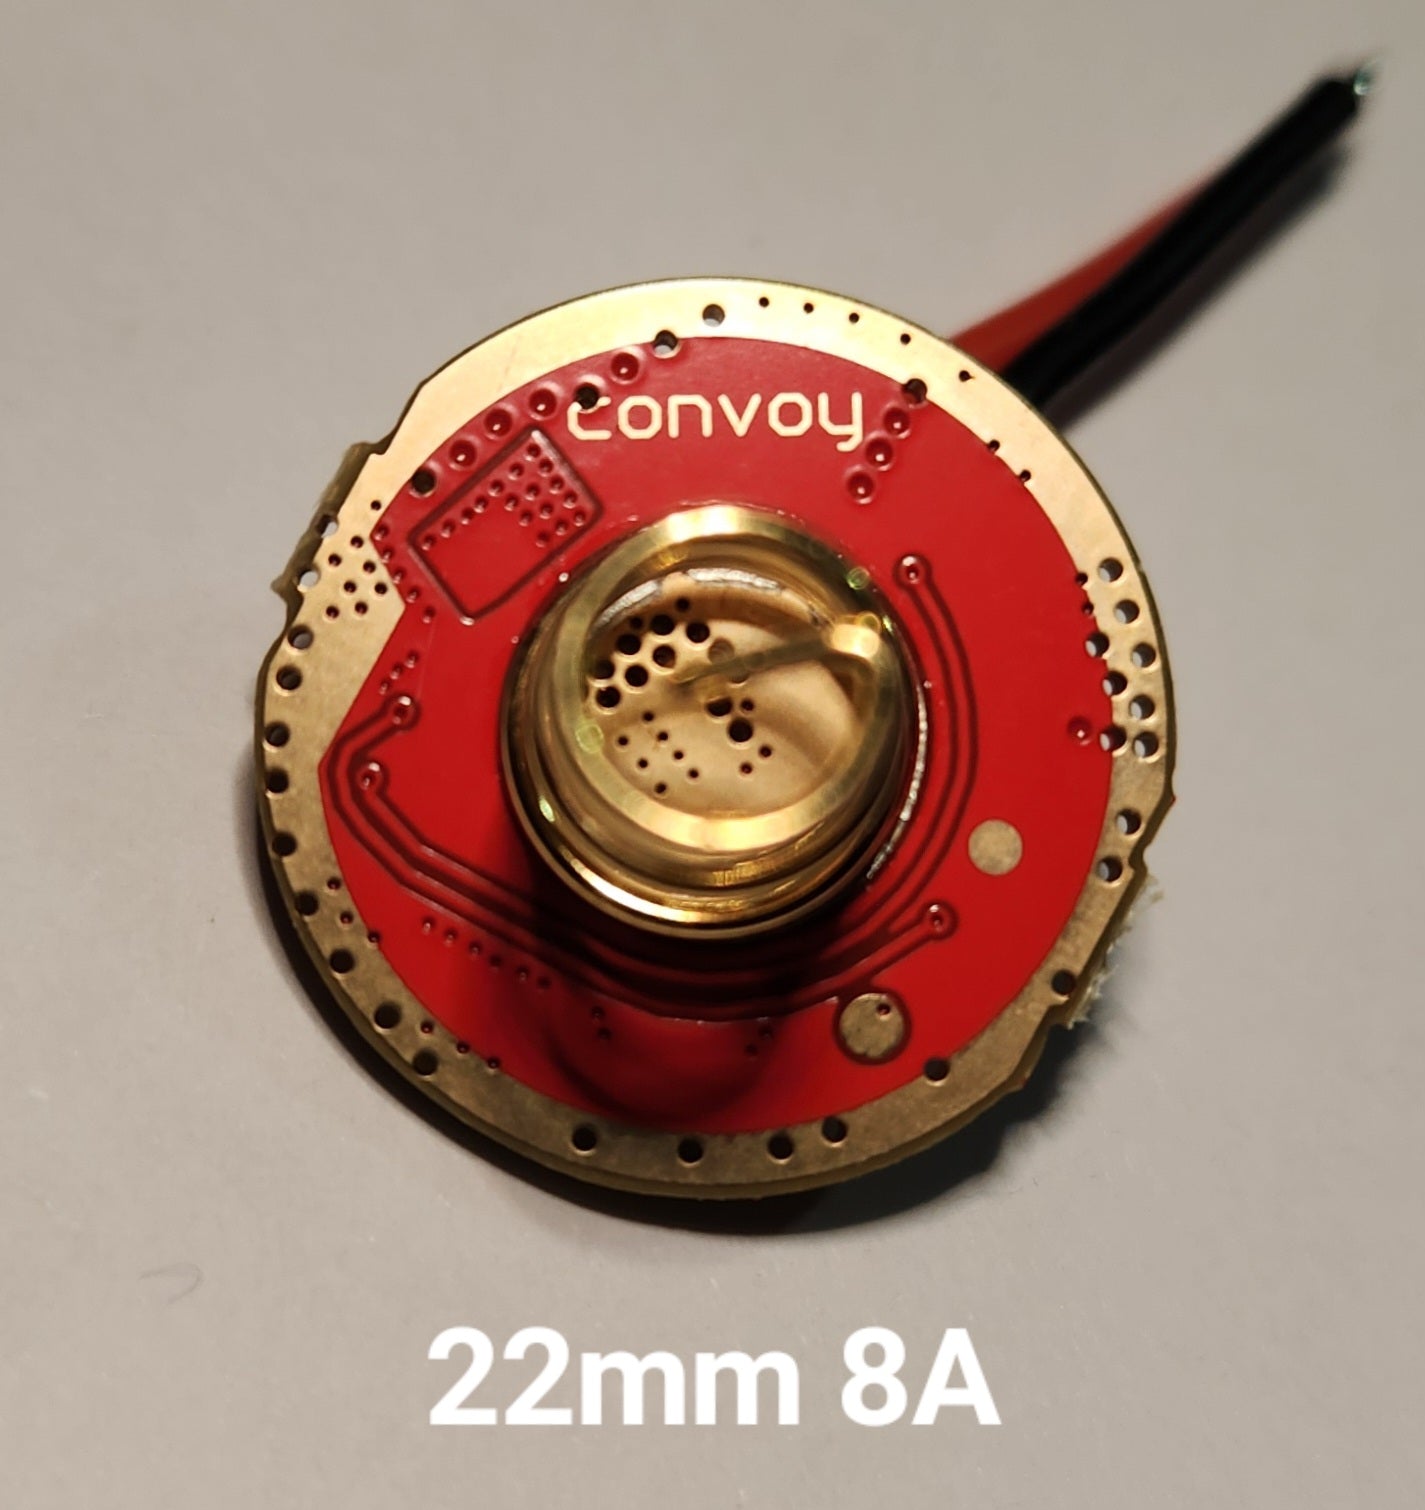 Convoy 22mm 8A LED buck driver for KW CULPM1.TG SFT40